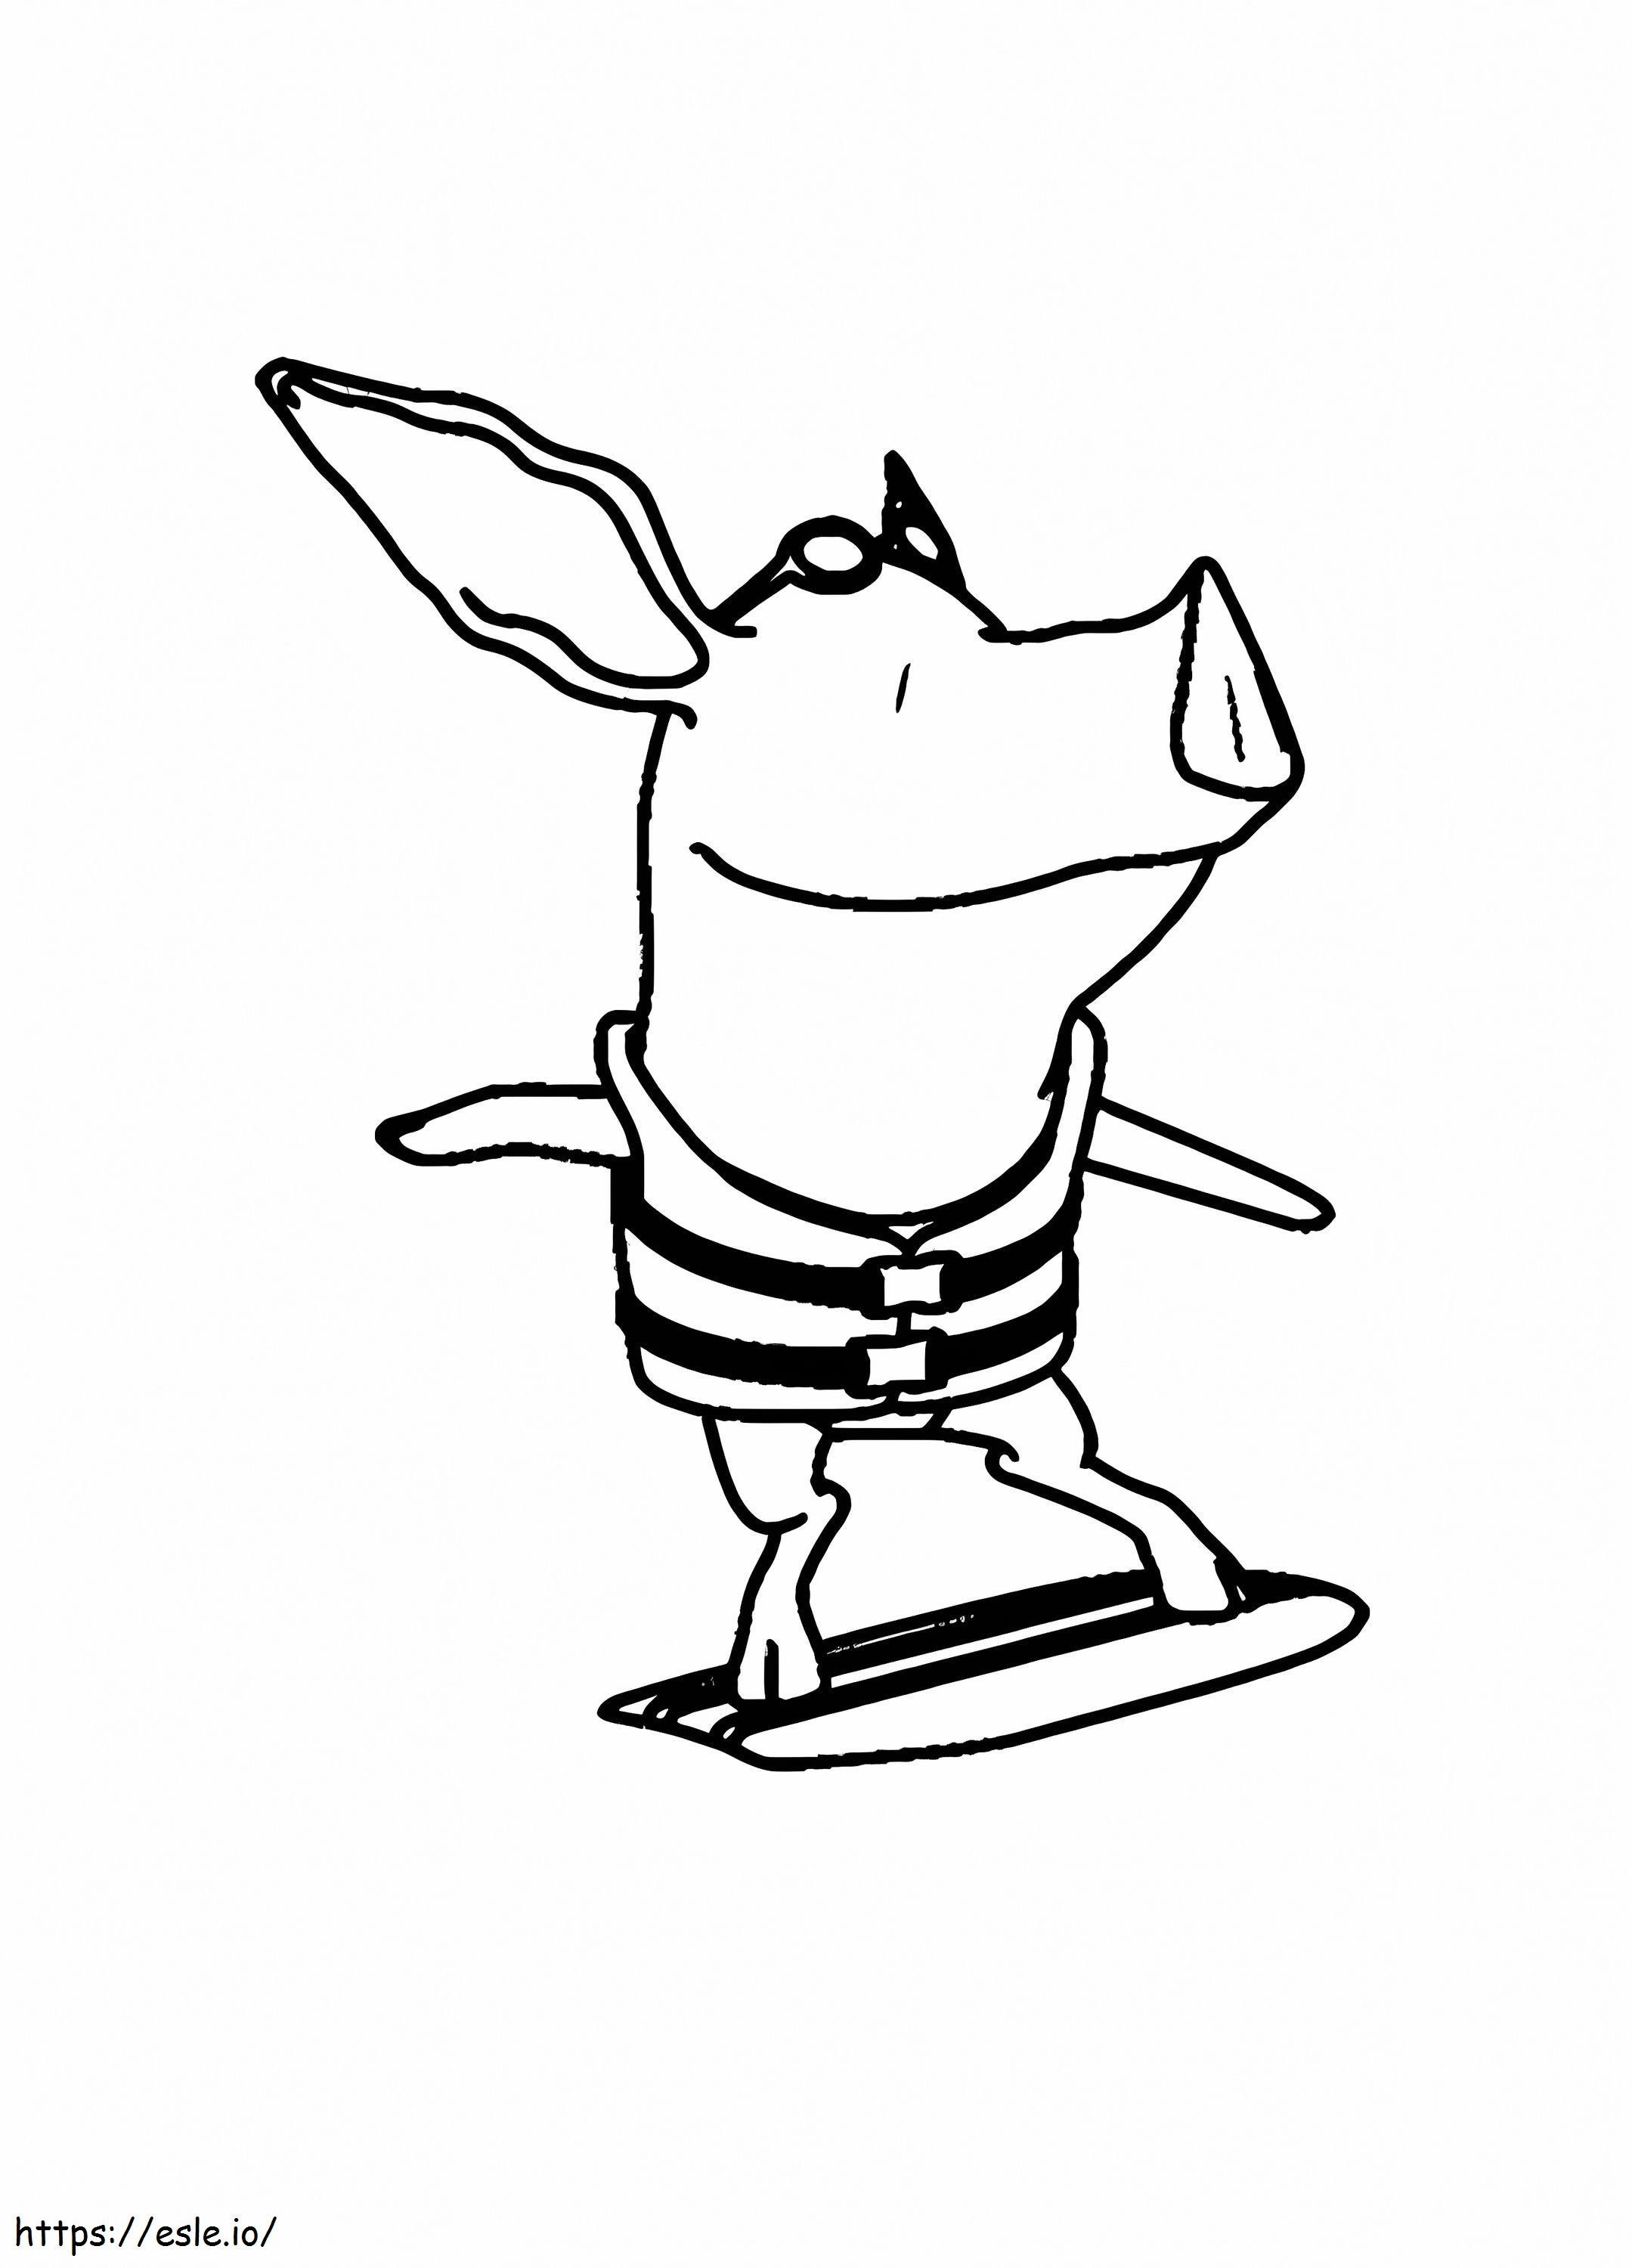 Olivia Surfing coloring page